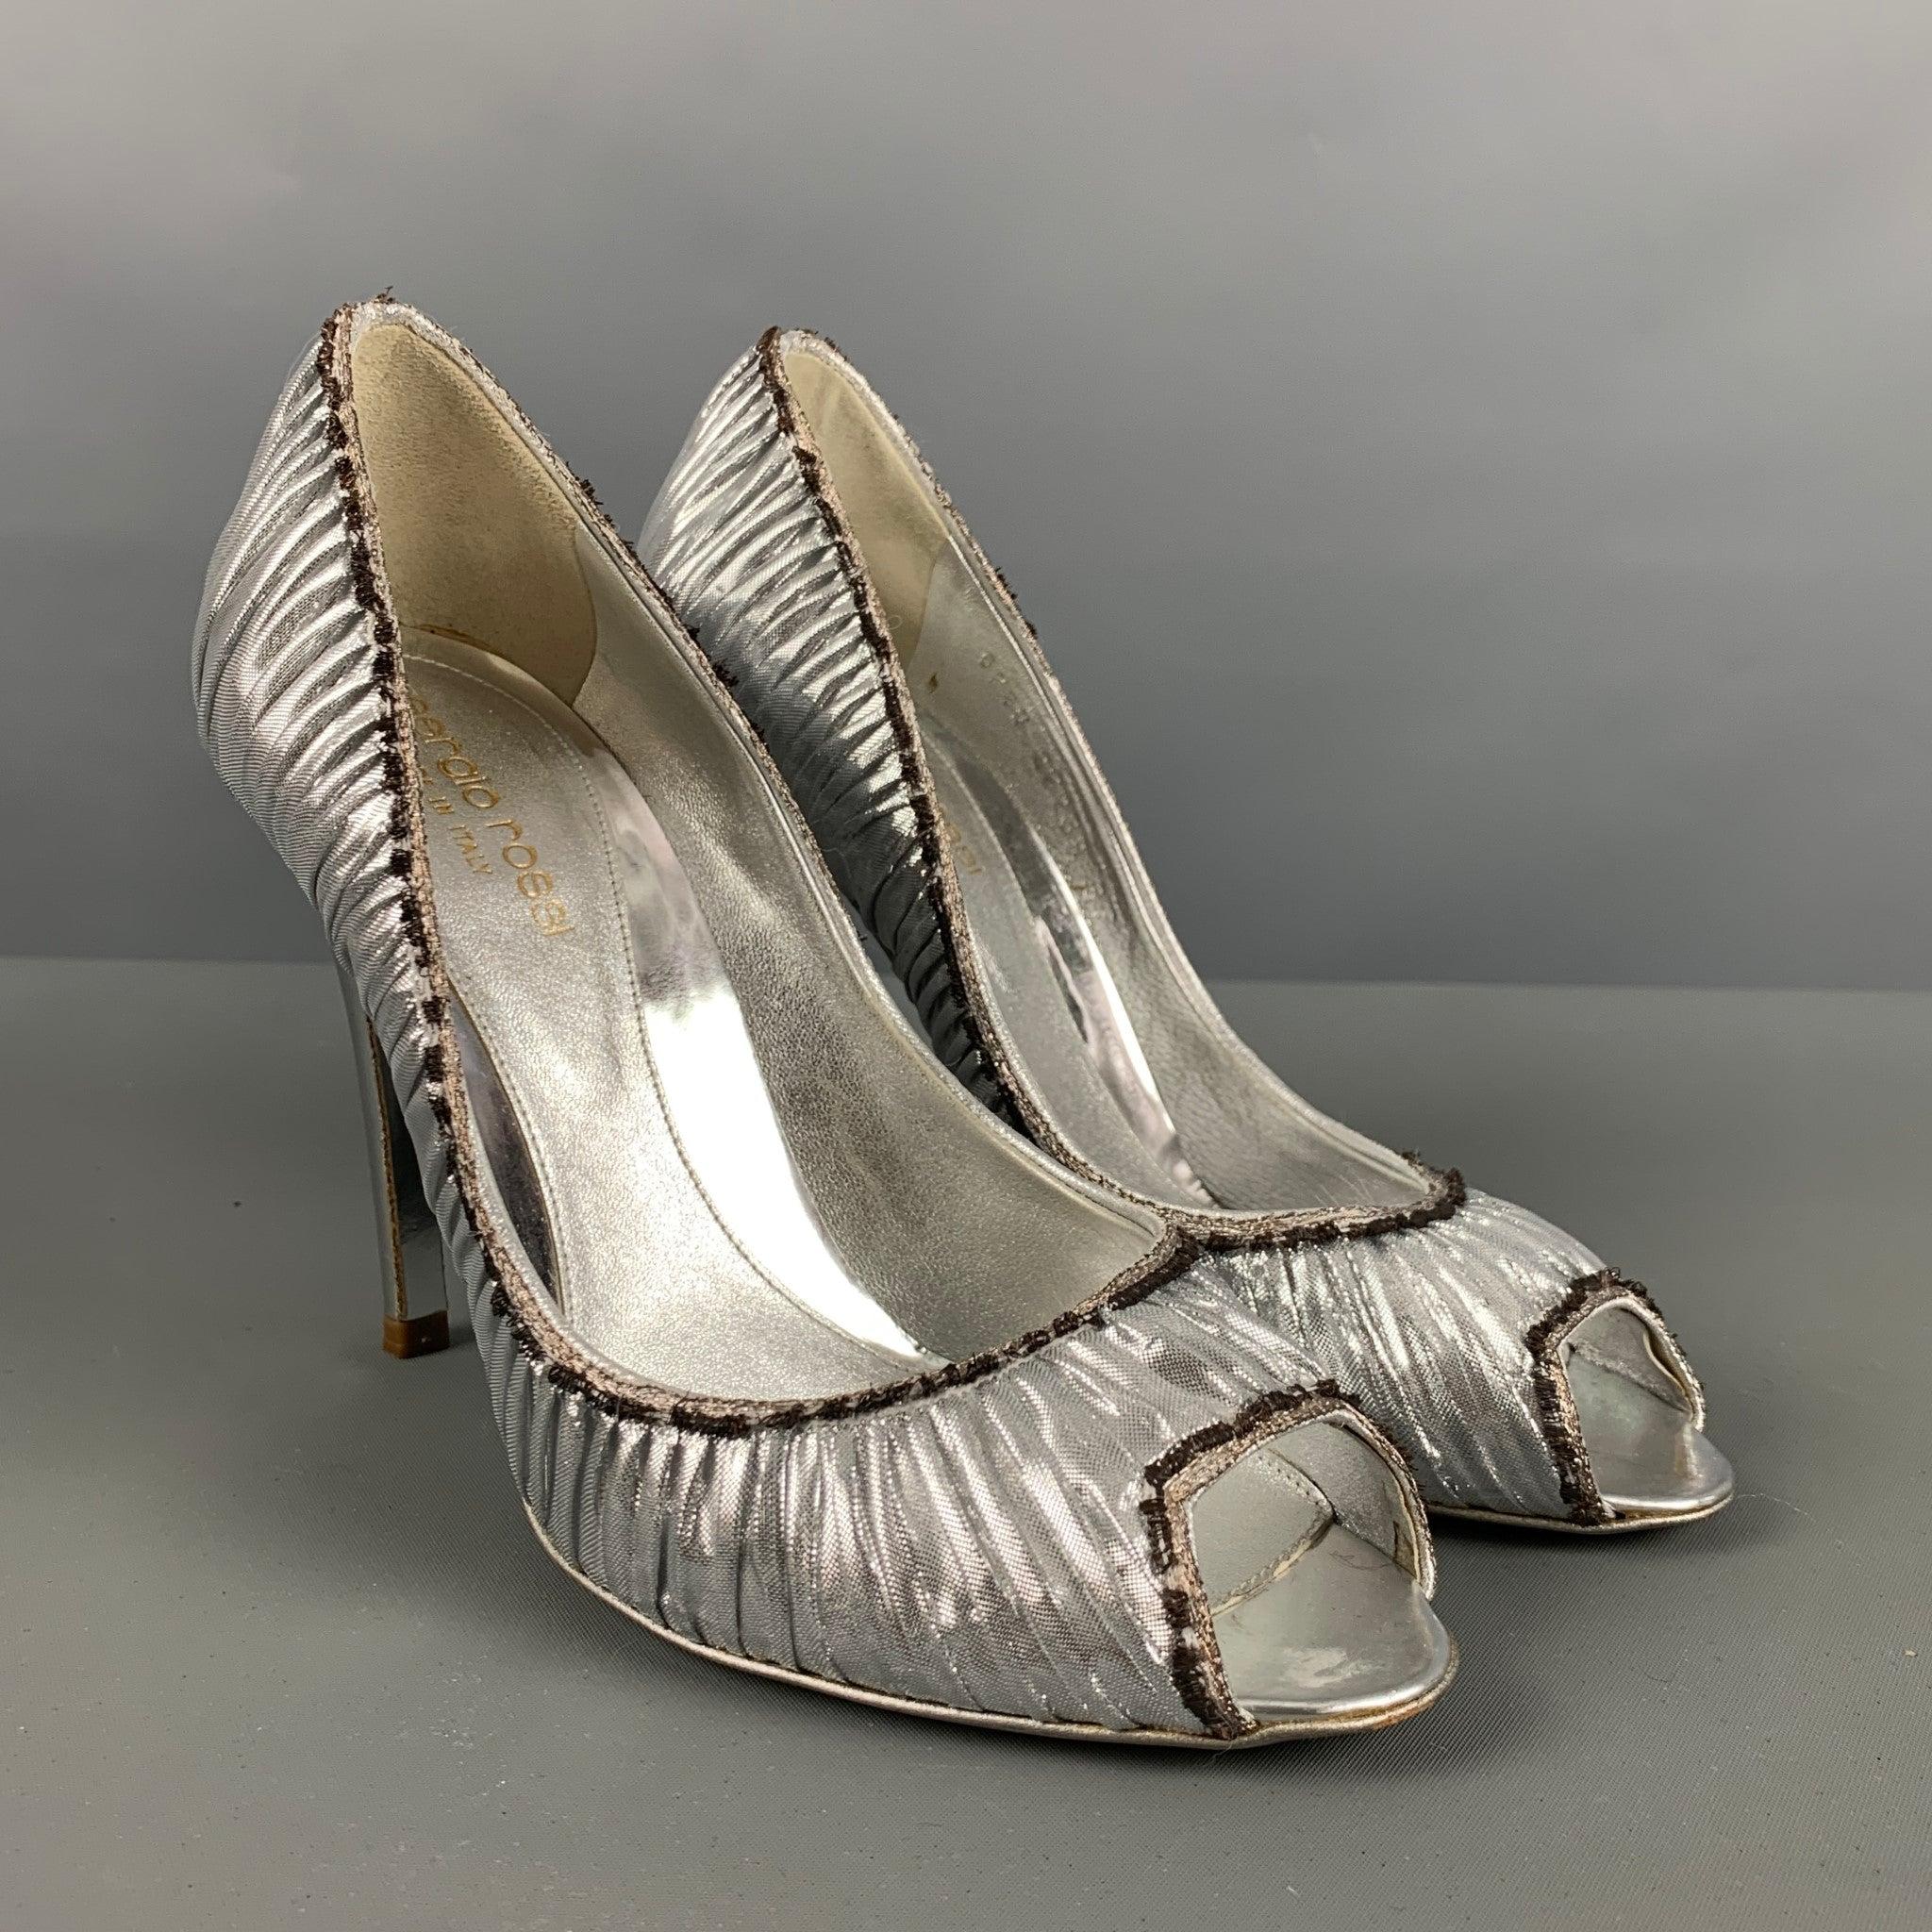 SERGIO ROSSI pumps comes in a silver metallic lame material featuring an open toe style and a silver metallic heel. Made in Italy.Very Good Pre-Owned Condition. Minor signs of wear. 

Marked:  
5756 27289 37 

Measurements: 
  Heel: 4.25 inches 
  
